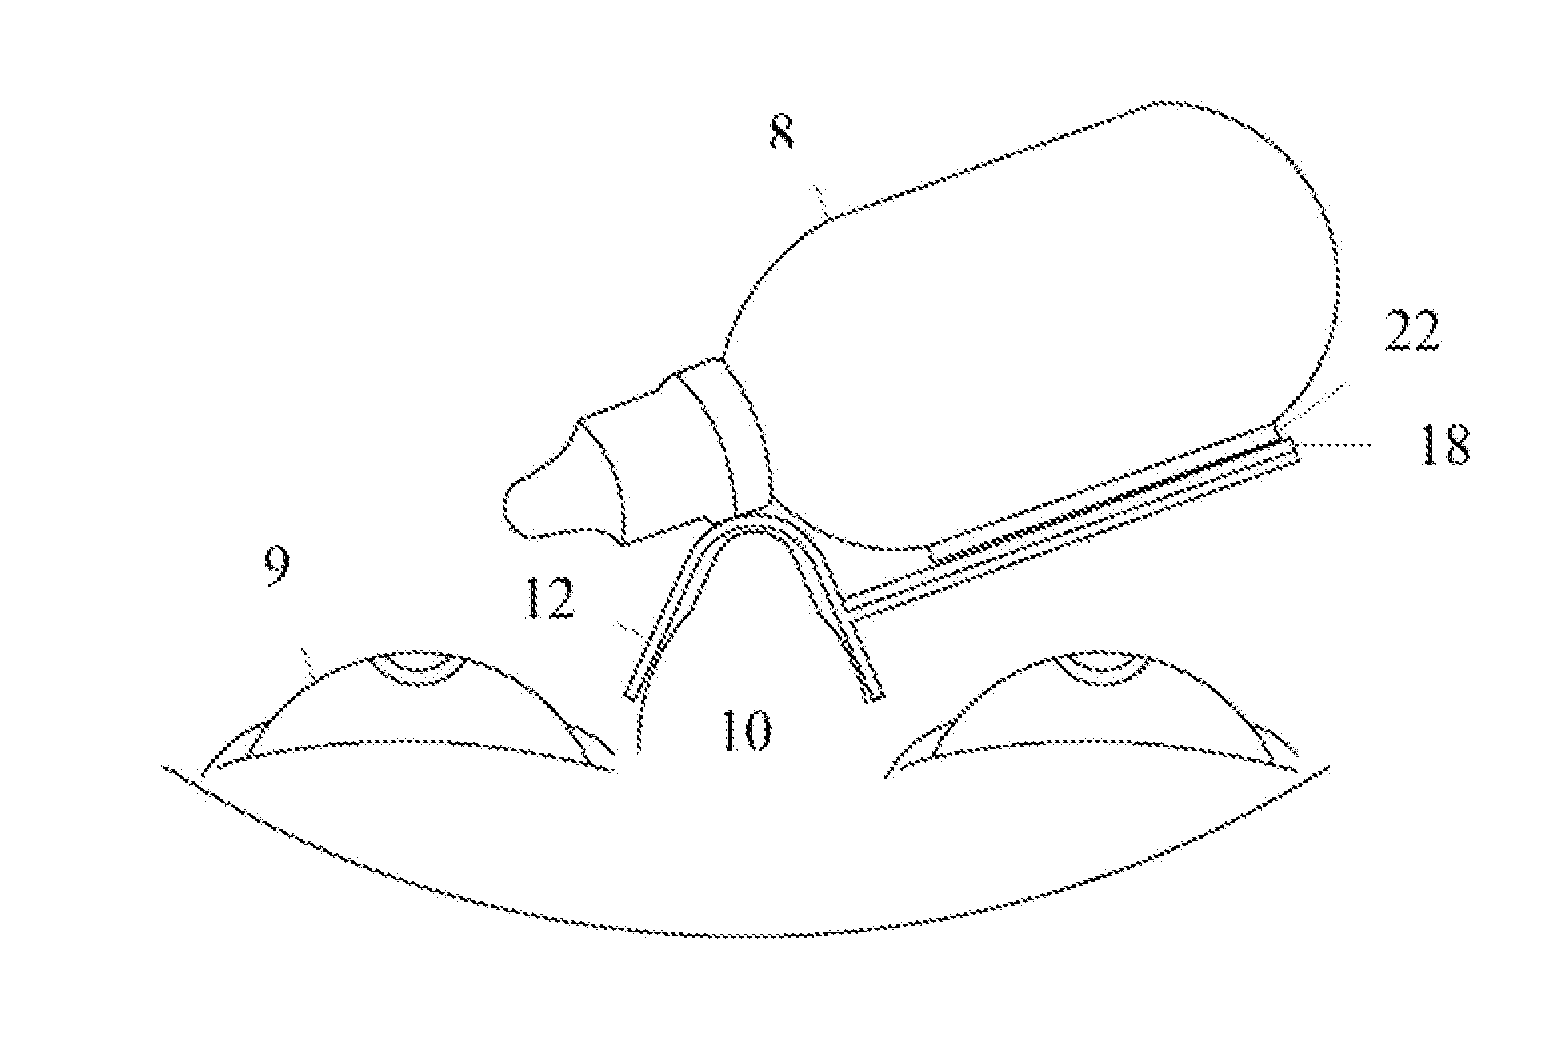 Ophthalmic device to guide and aid the use of an eye drop dispenser